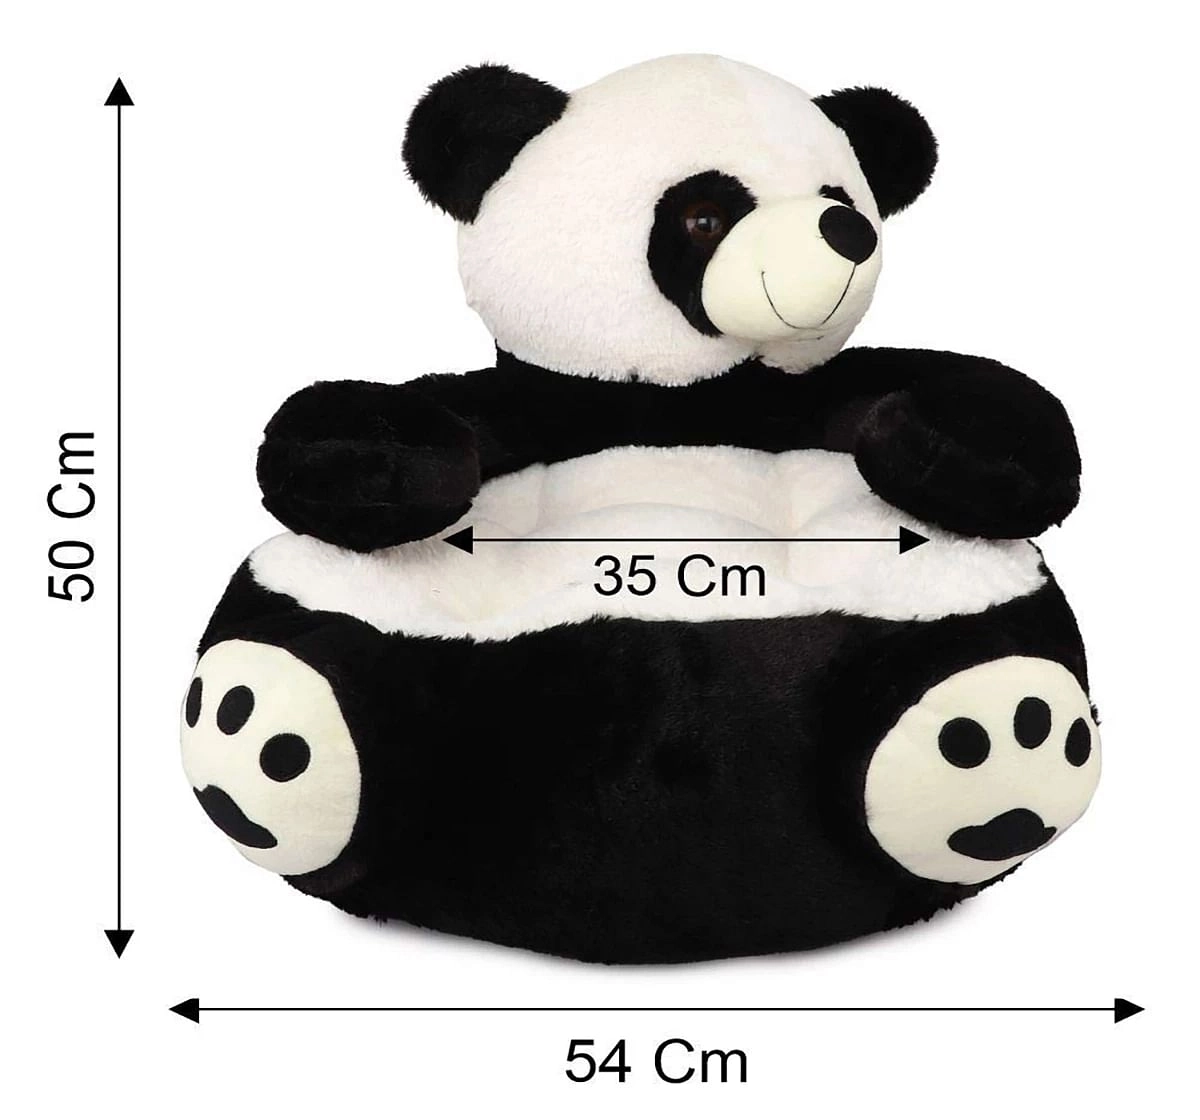 Plush Sitting Panda Armchair With Backrest, Cushion Comfortable Seat by Webby, Soft Toy For Kids (1-3 Years), Multicolor